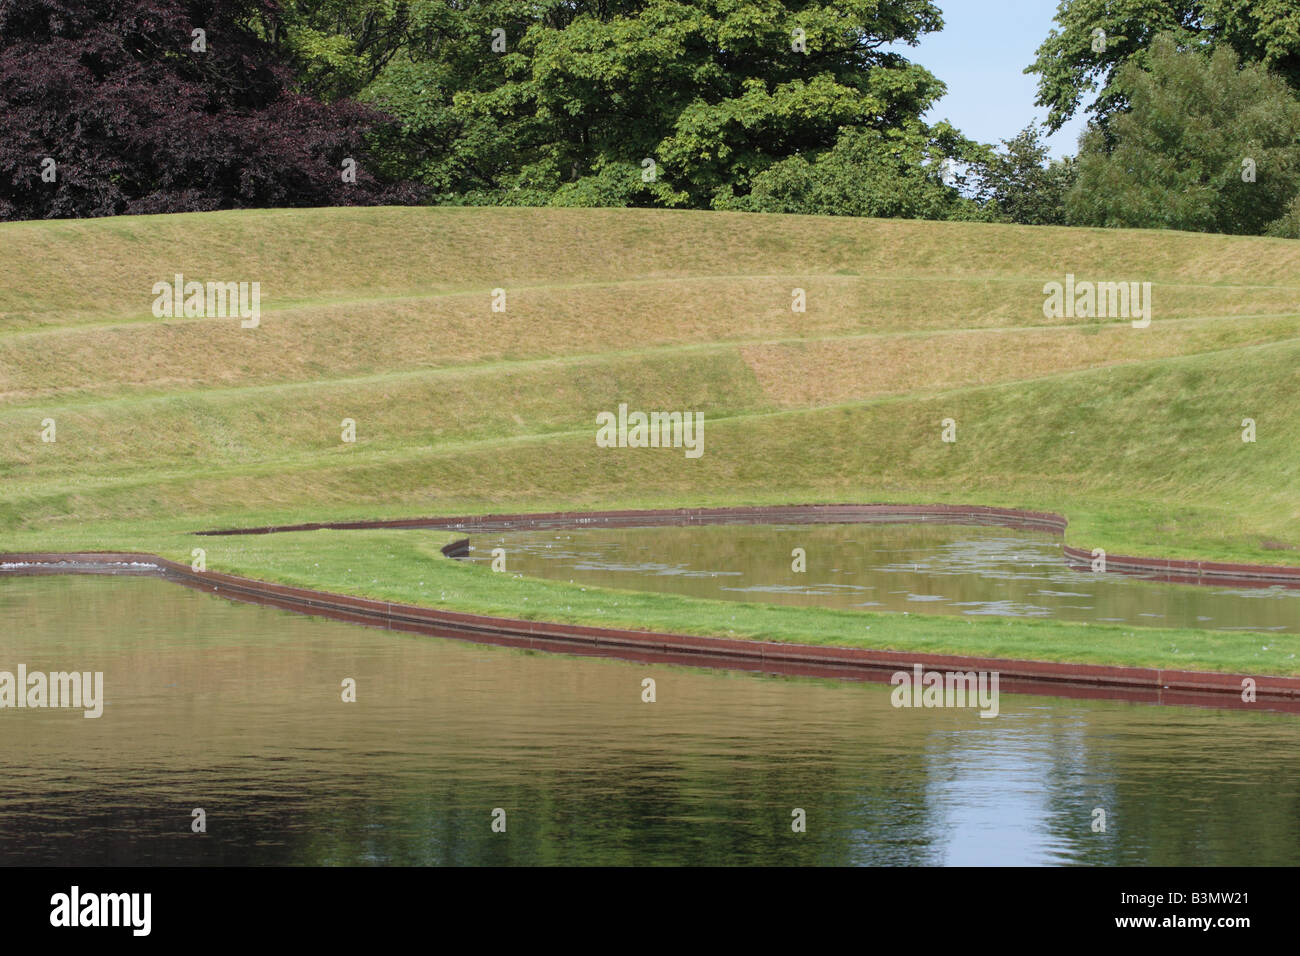 The Landform located on the lawn of the Scottish National Gallery of Modern Art, Edinburgh. Stock Photo